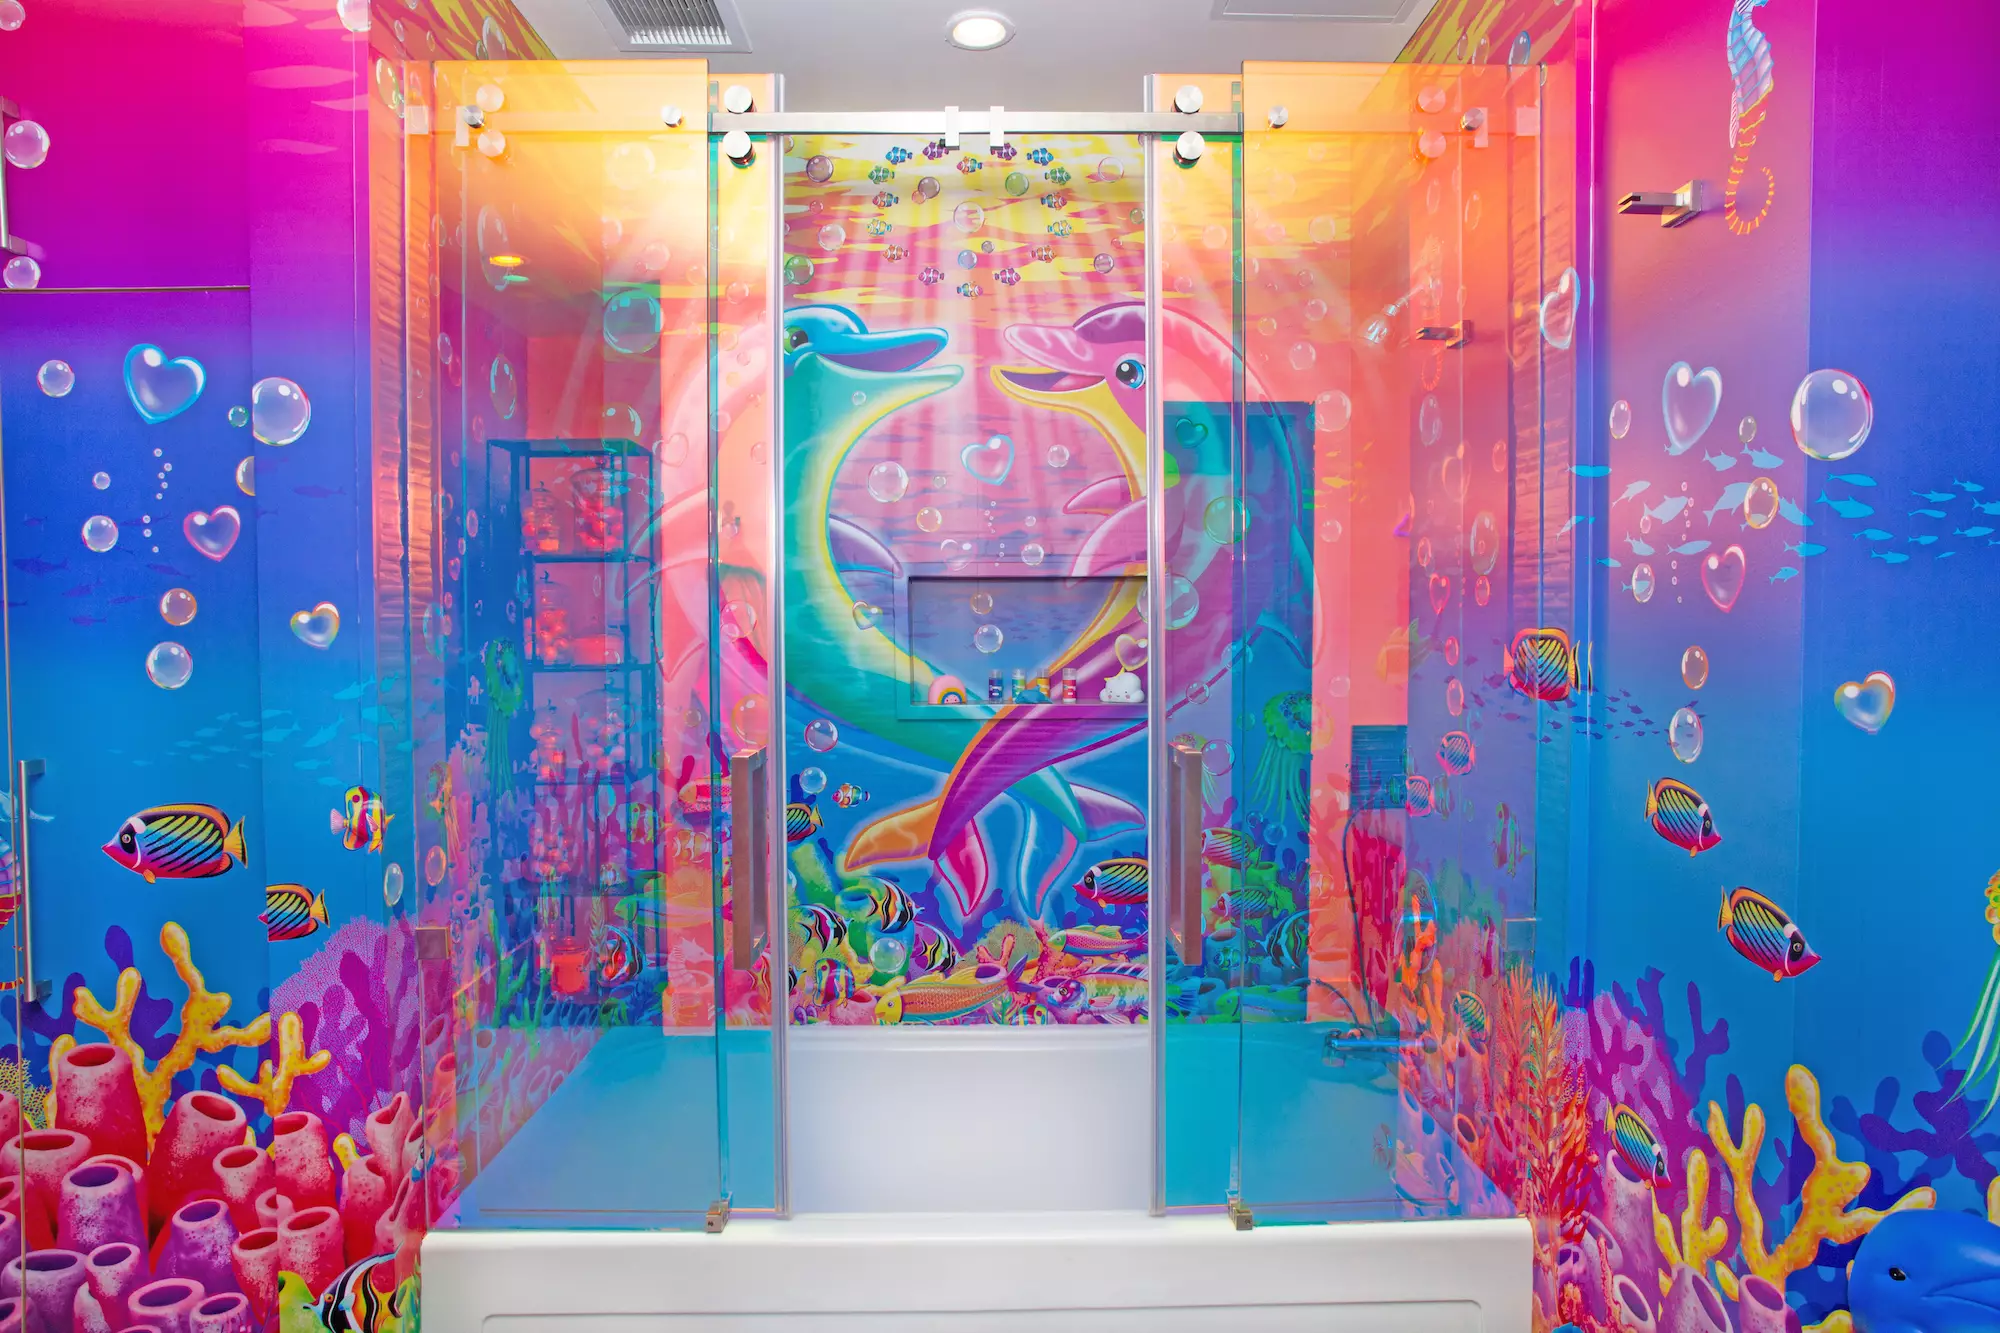 This kitsch dolphin bathroom is other-worldly.